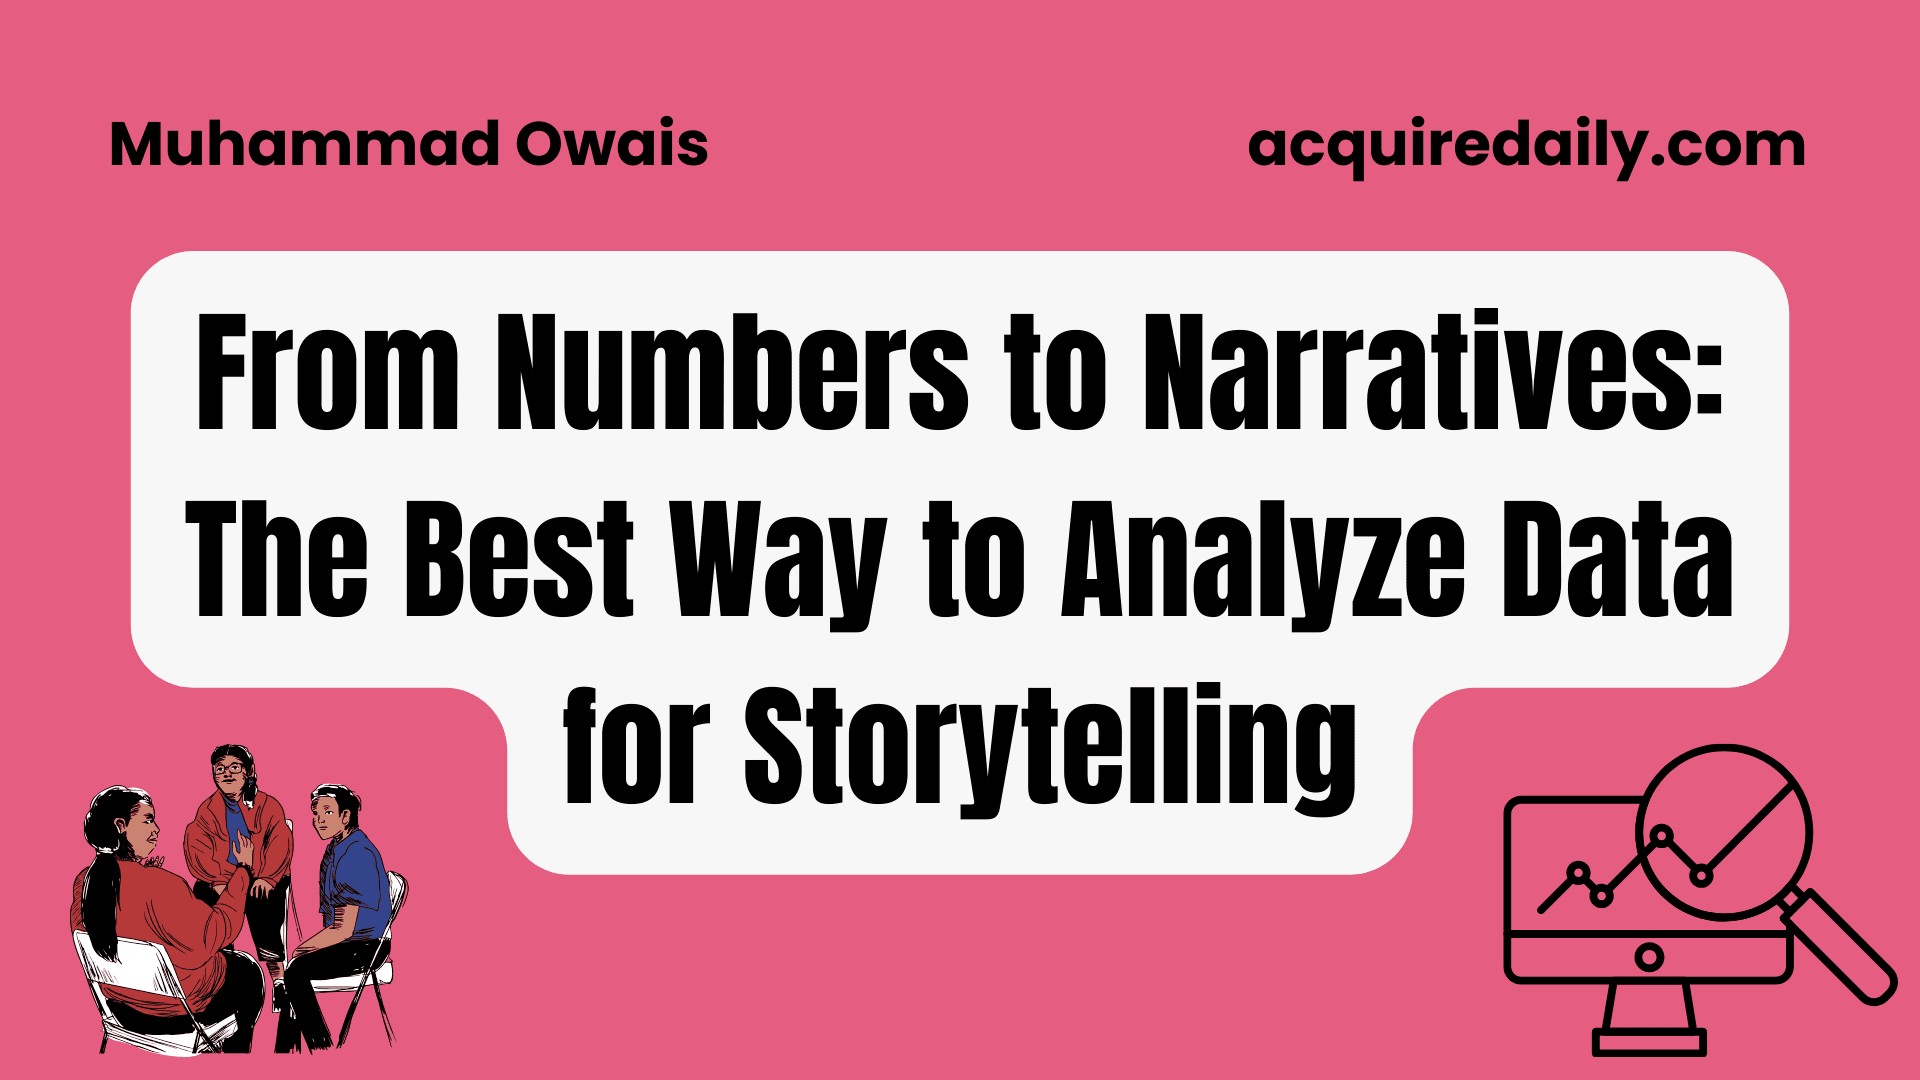 From Numbers to Narratives: The Best Way to Analyze Data for Storytelling - Acquire Daily